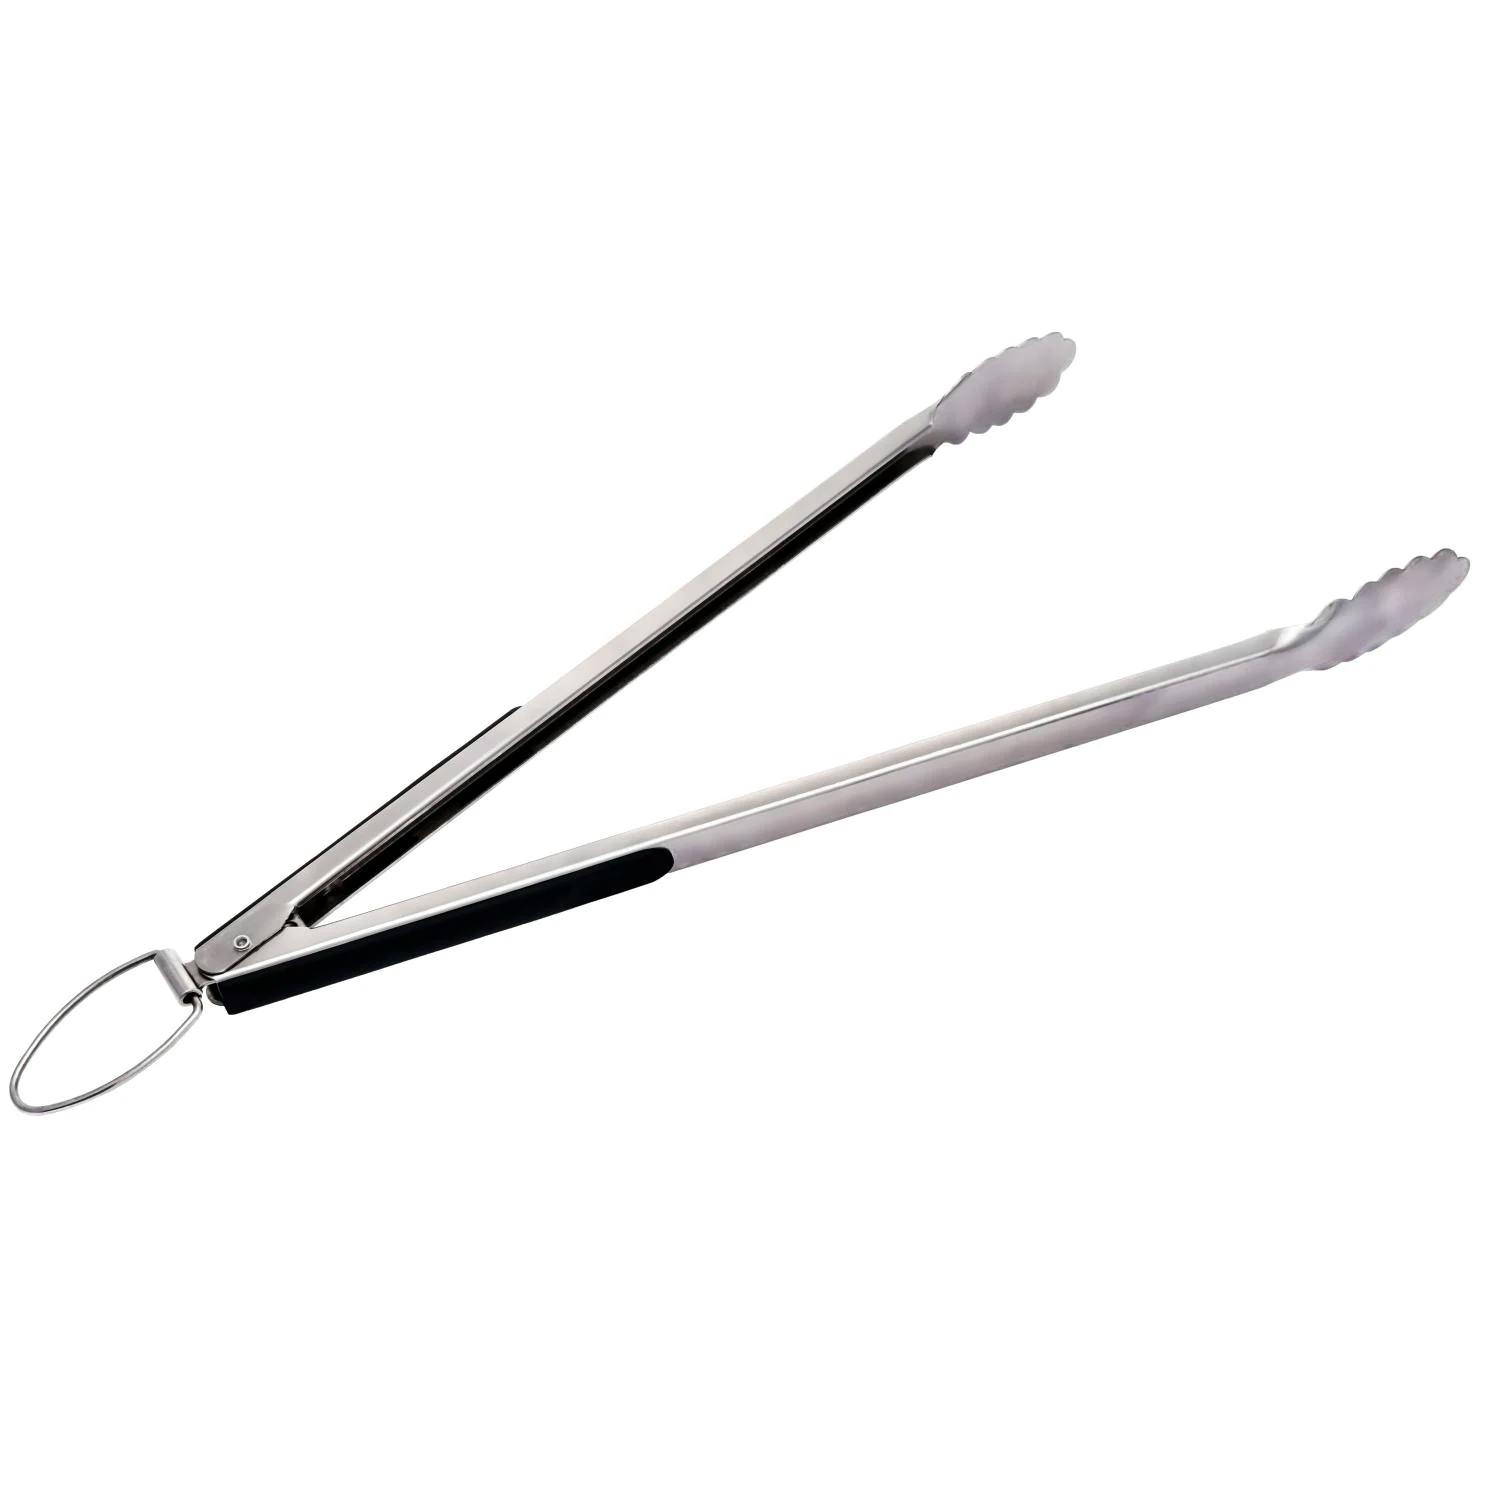 Saber Stainless Steel XL Tongs